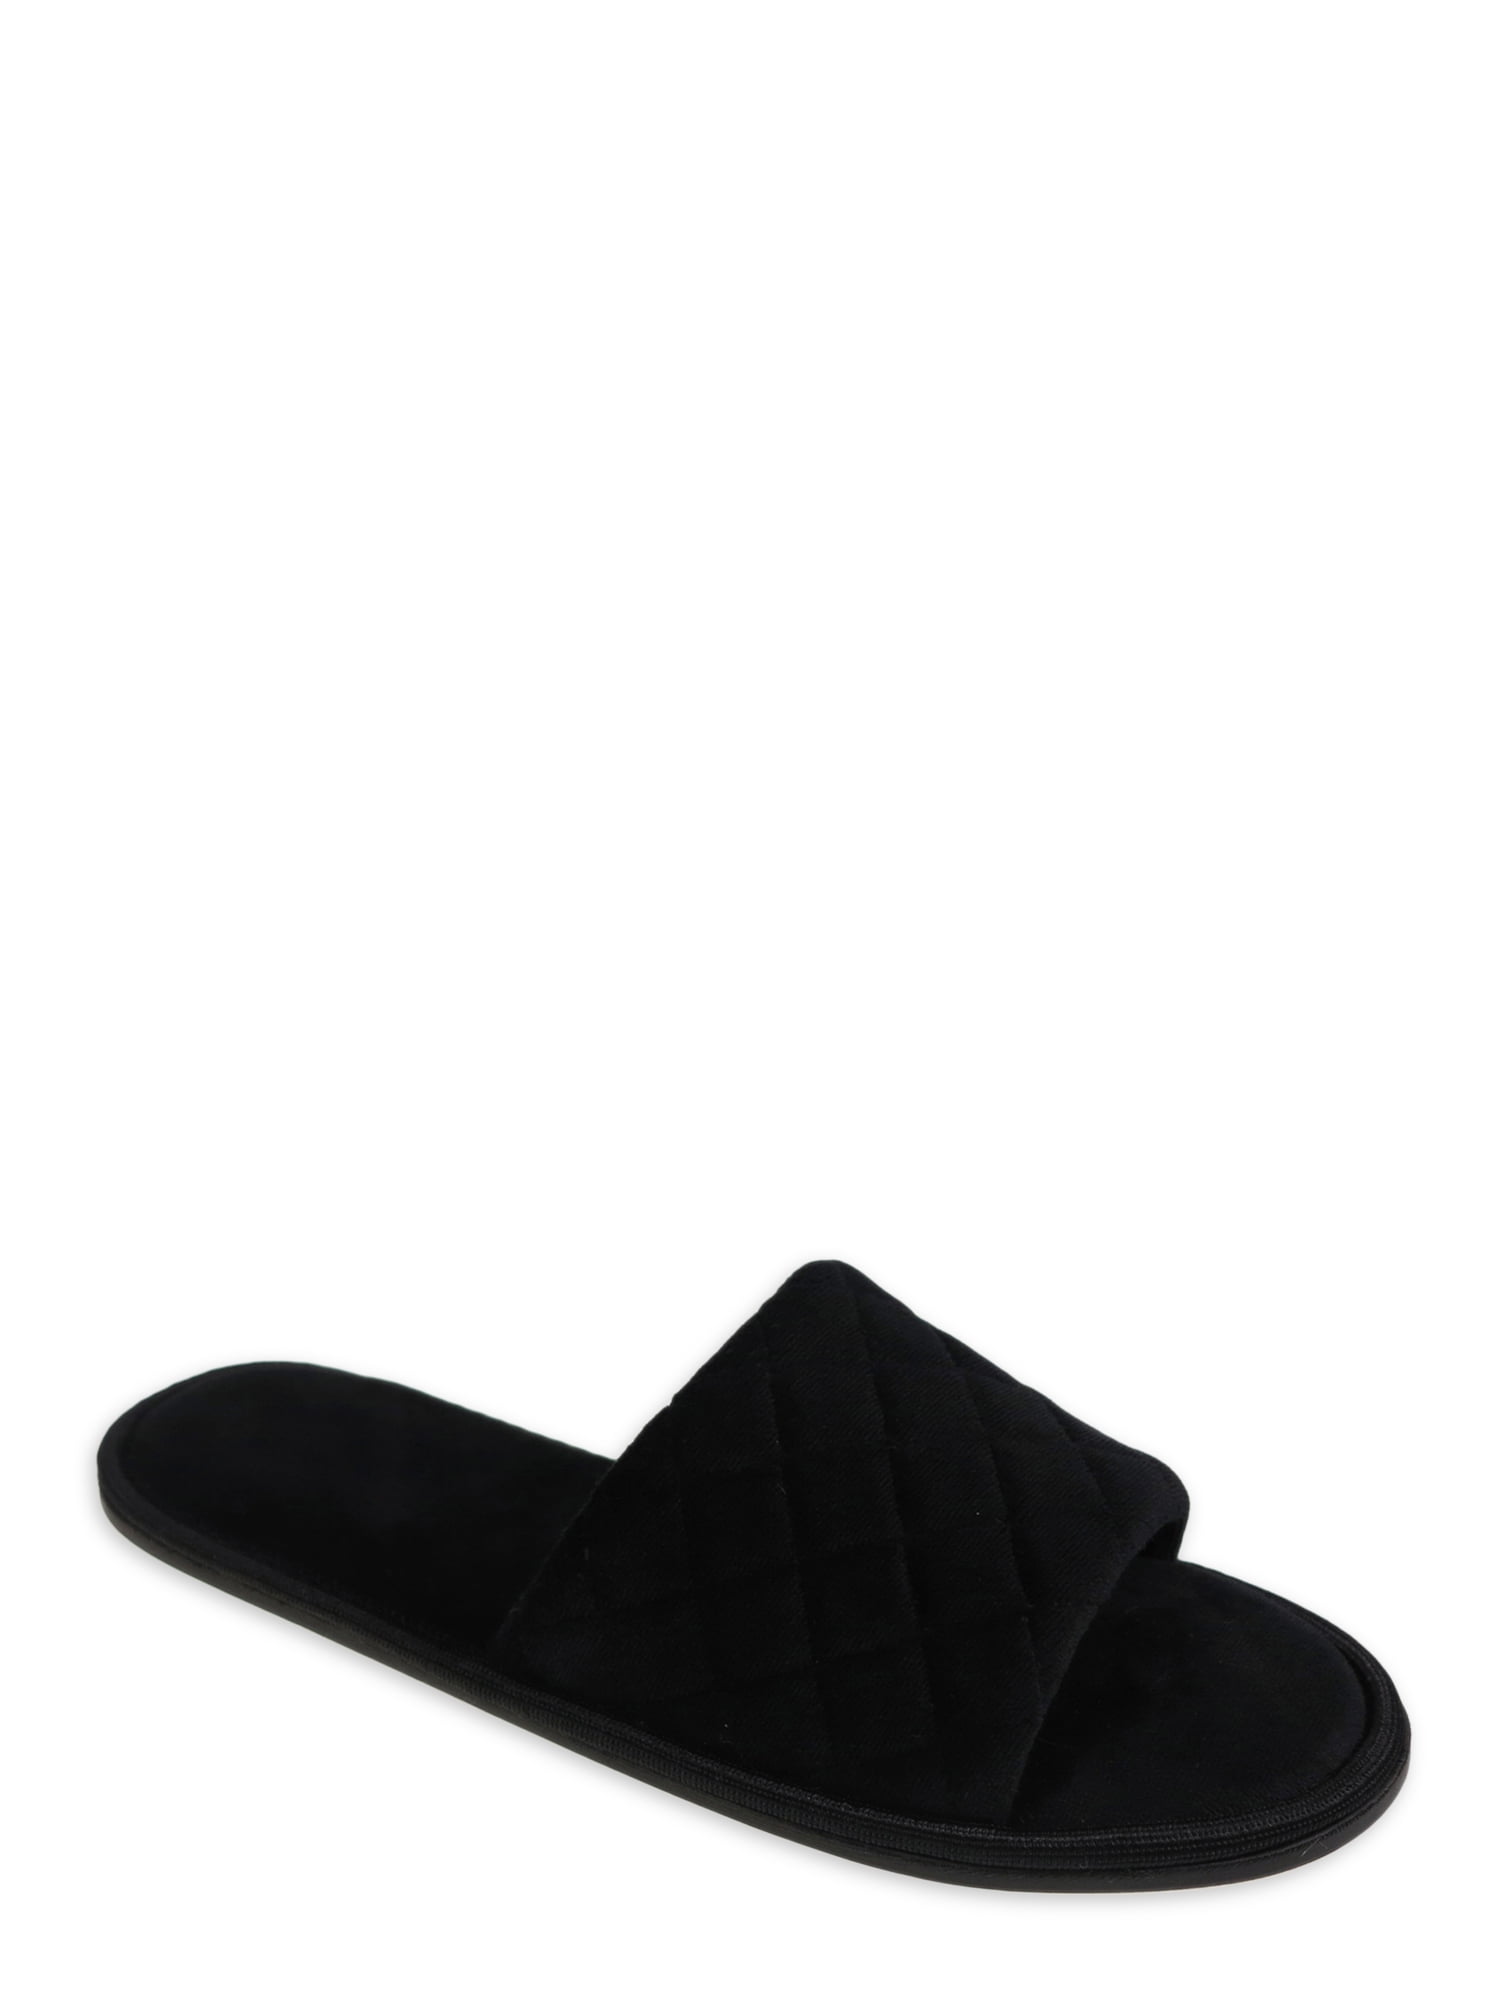 Secret Treasures Womens Wide Width One Band Slippers